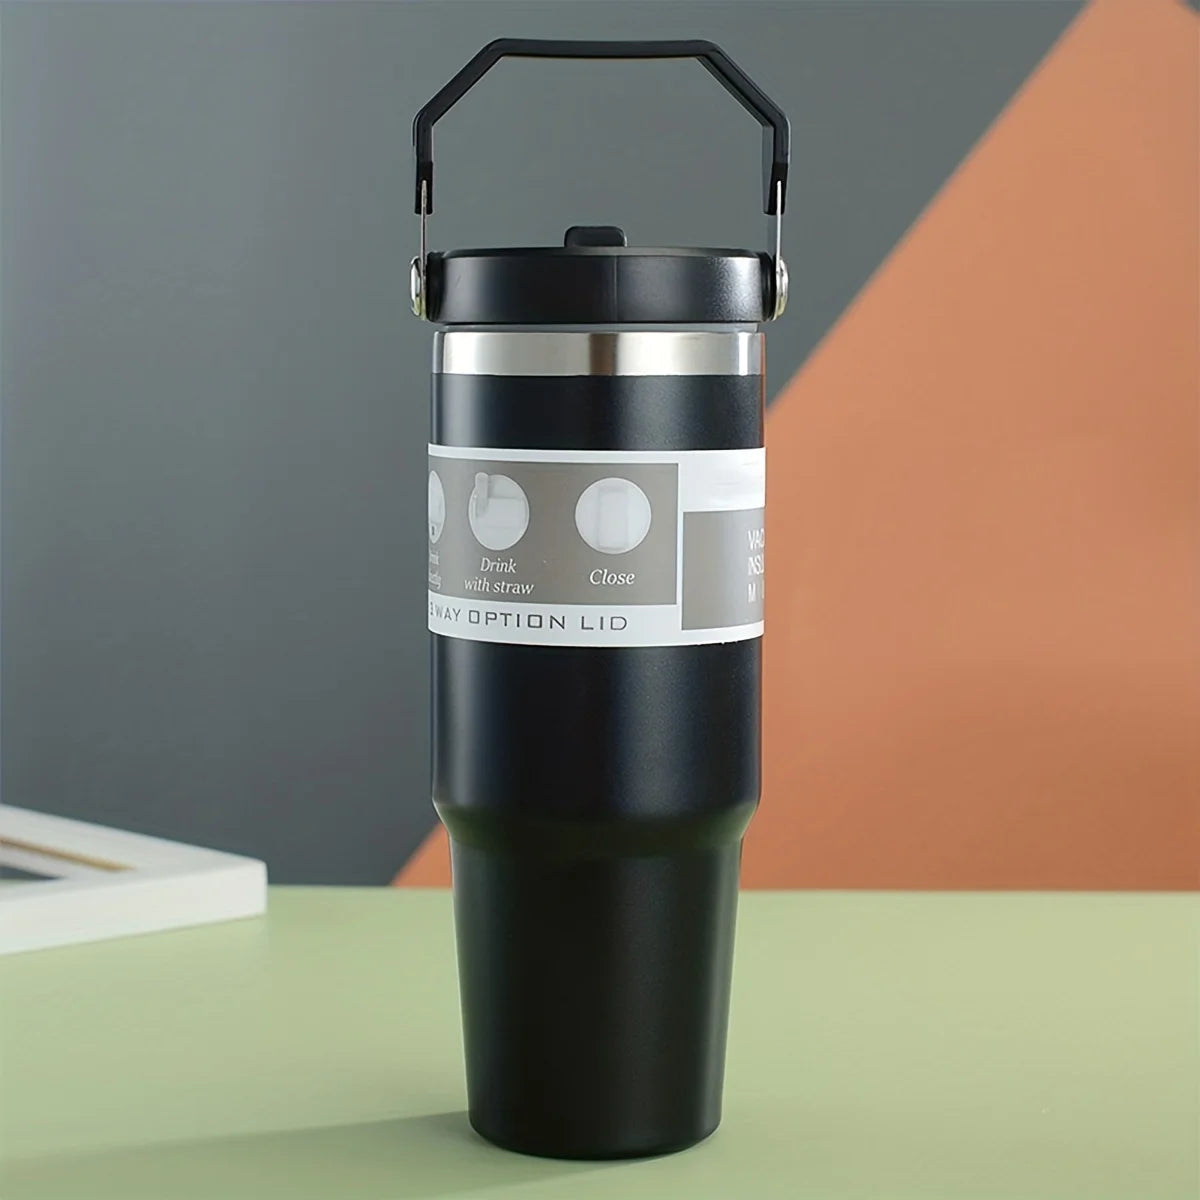 Sleek stainless steel insulated cup with two-tone design and convenient handle, perfect for keeping beverages hot or cold on the go.